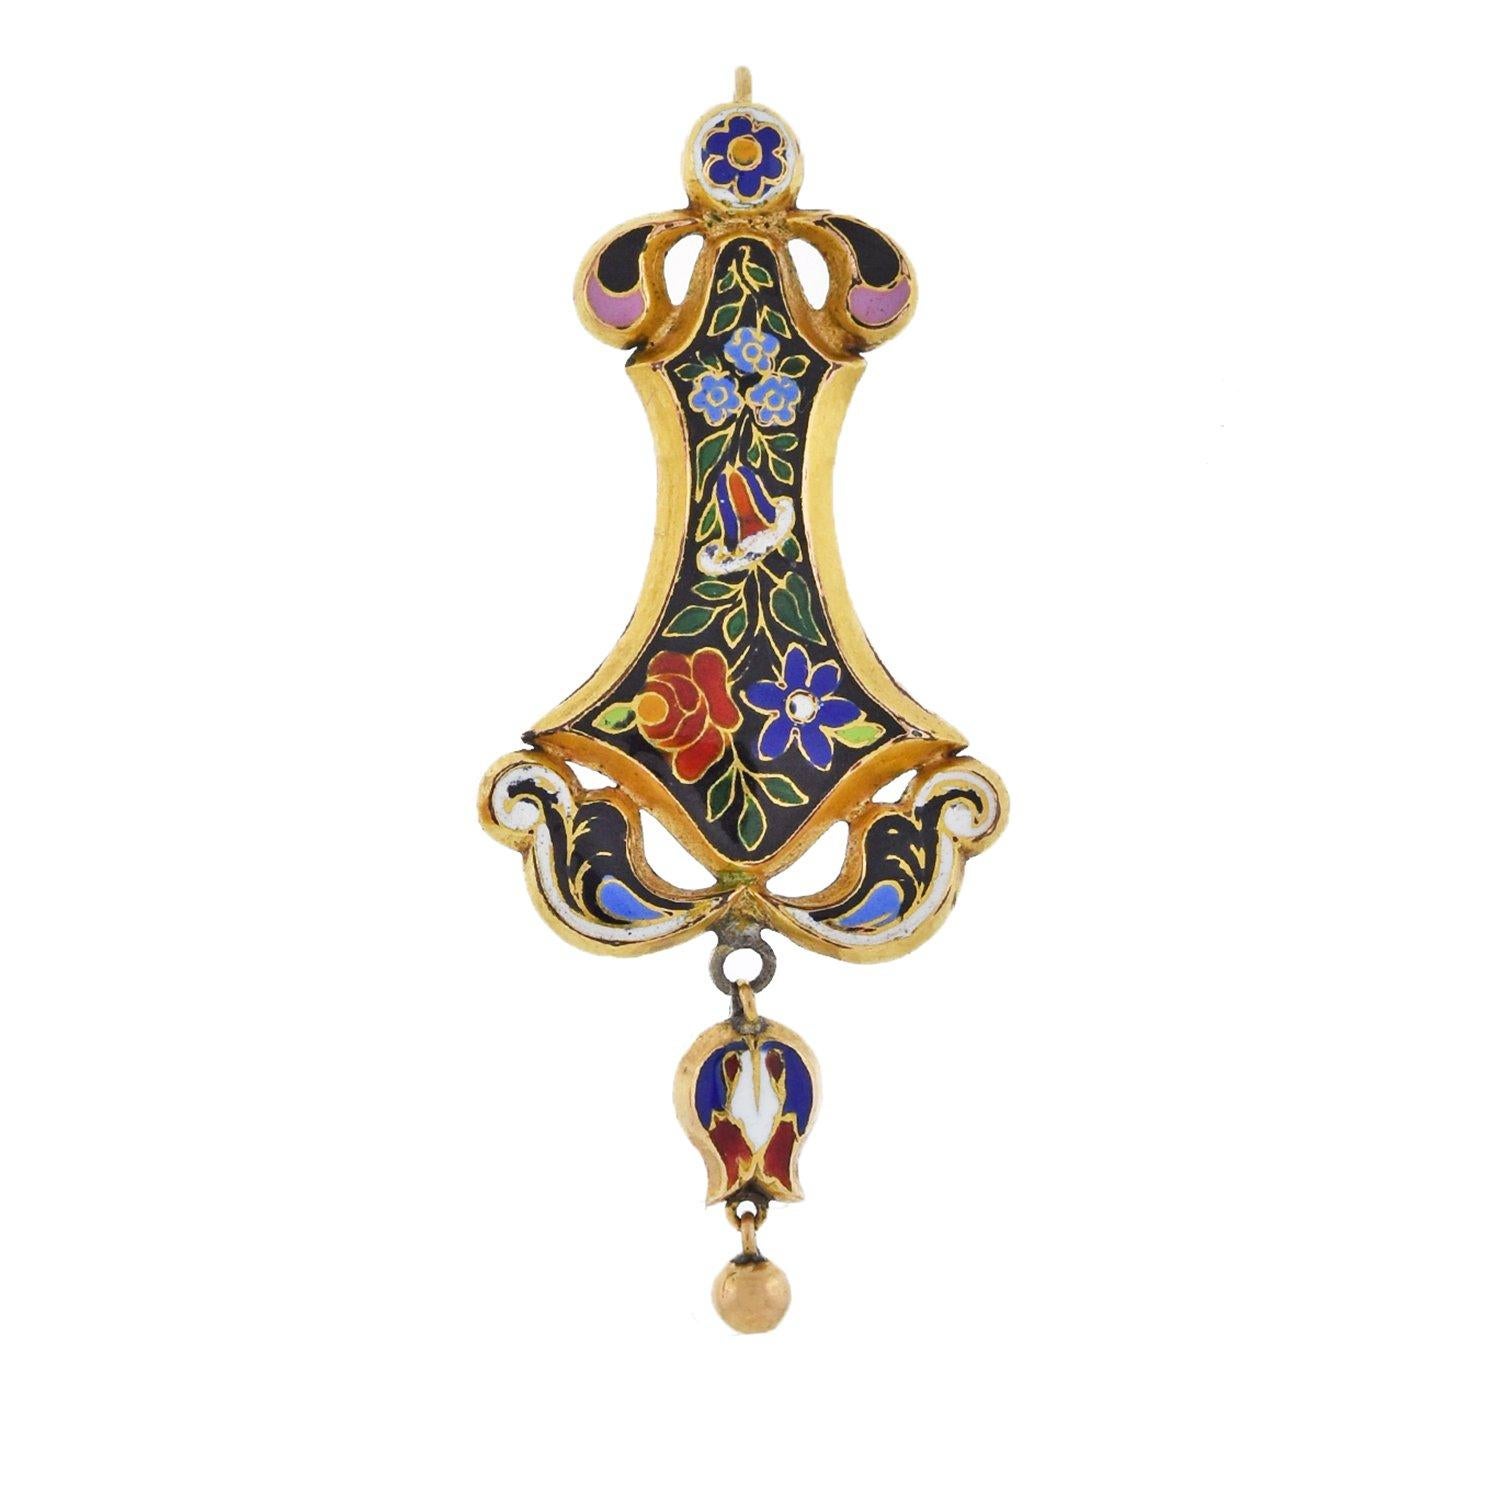 Swiss enameled pieces were commonly produced to be sold as souvenirs for Victorian travelers. A very fine type of enameling, this technique used very intricate detail and often portrayed scenic Swiss Alps villages with streams, mountains and